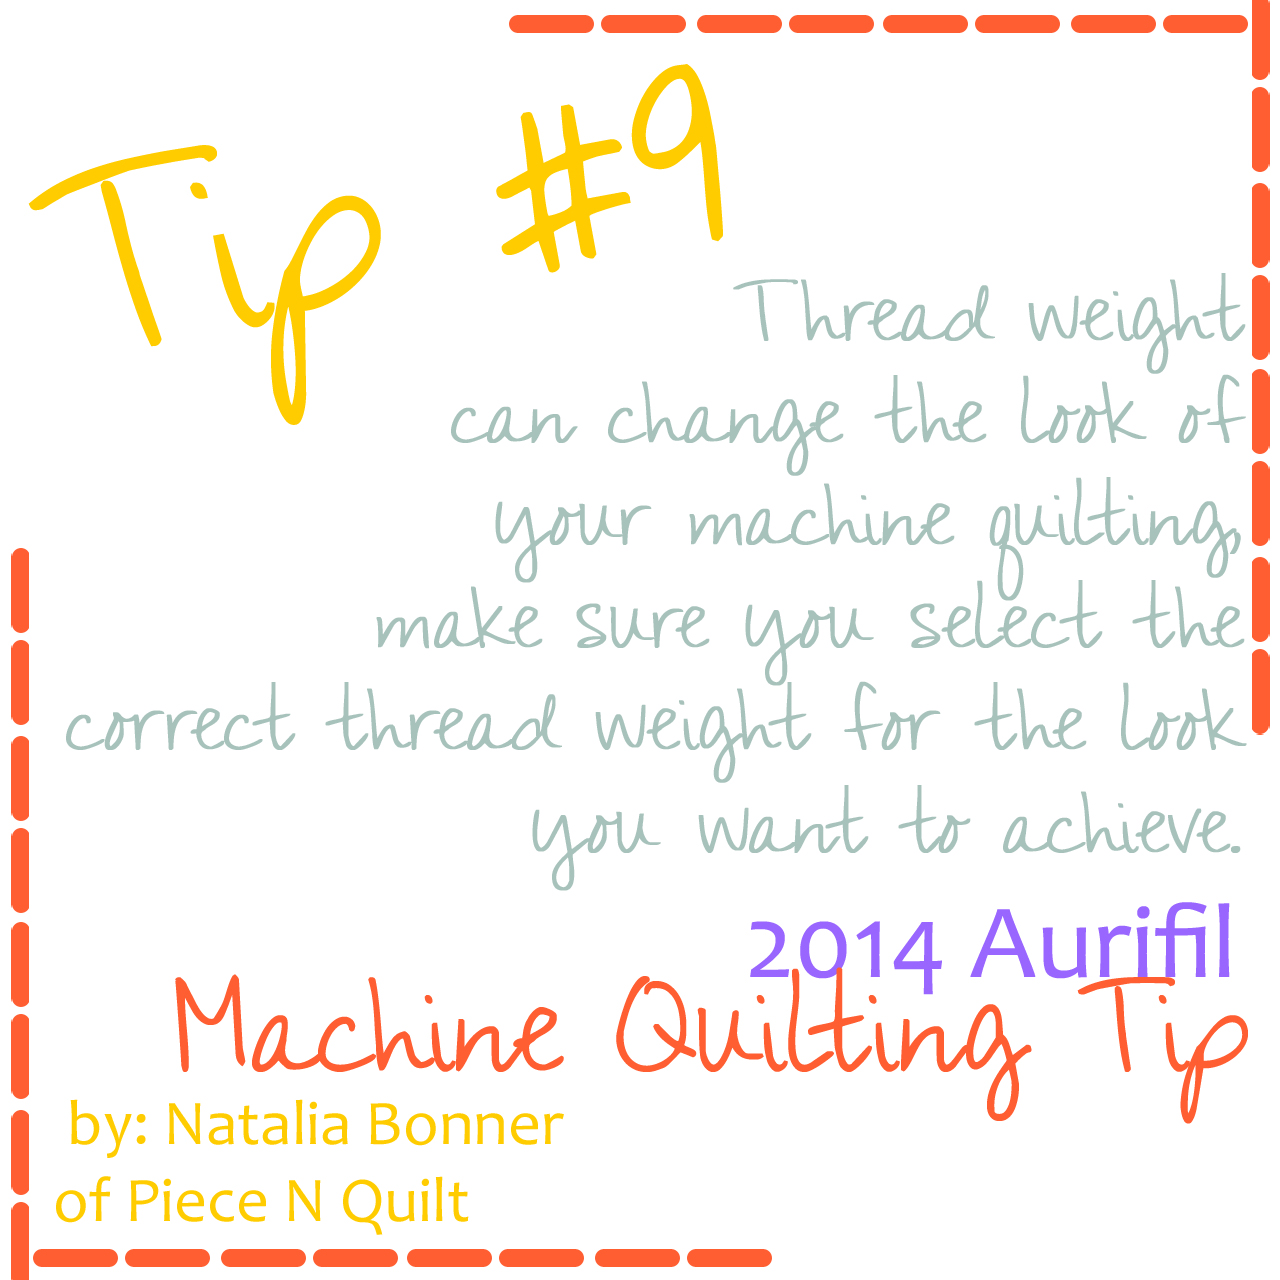 machine quilting tip for aurifil number 9-1